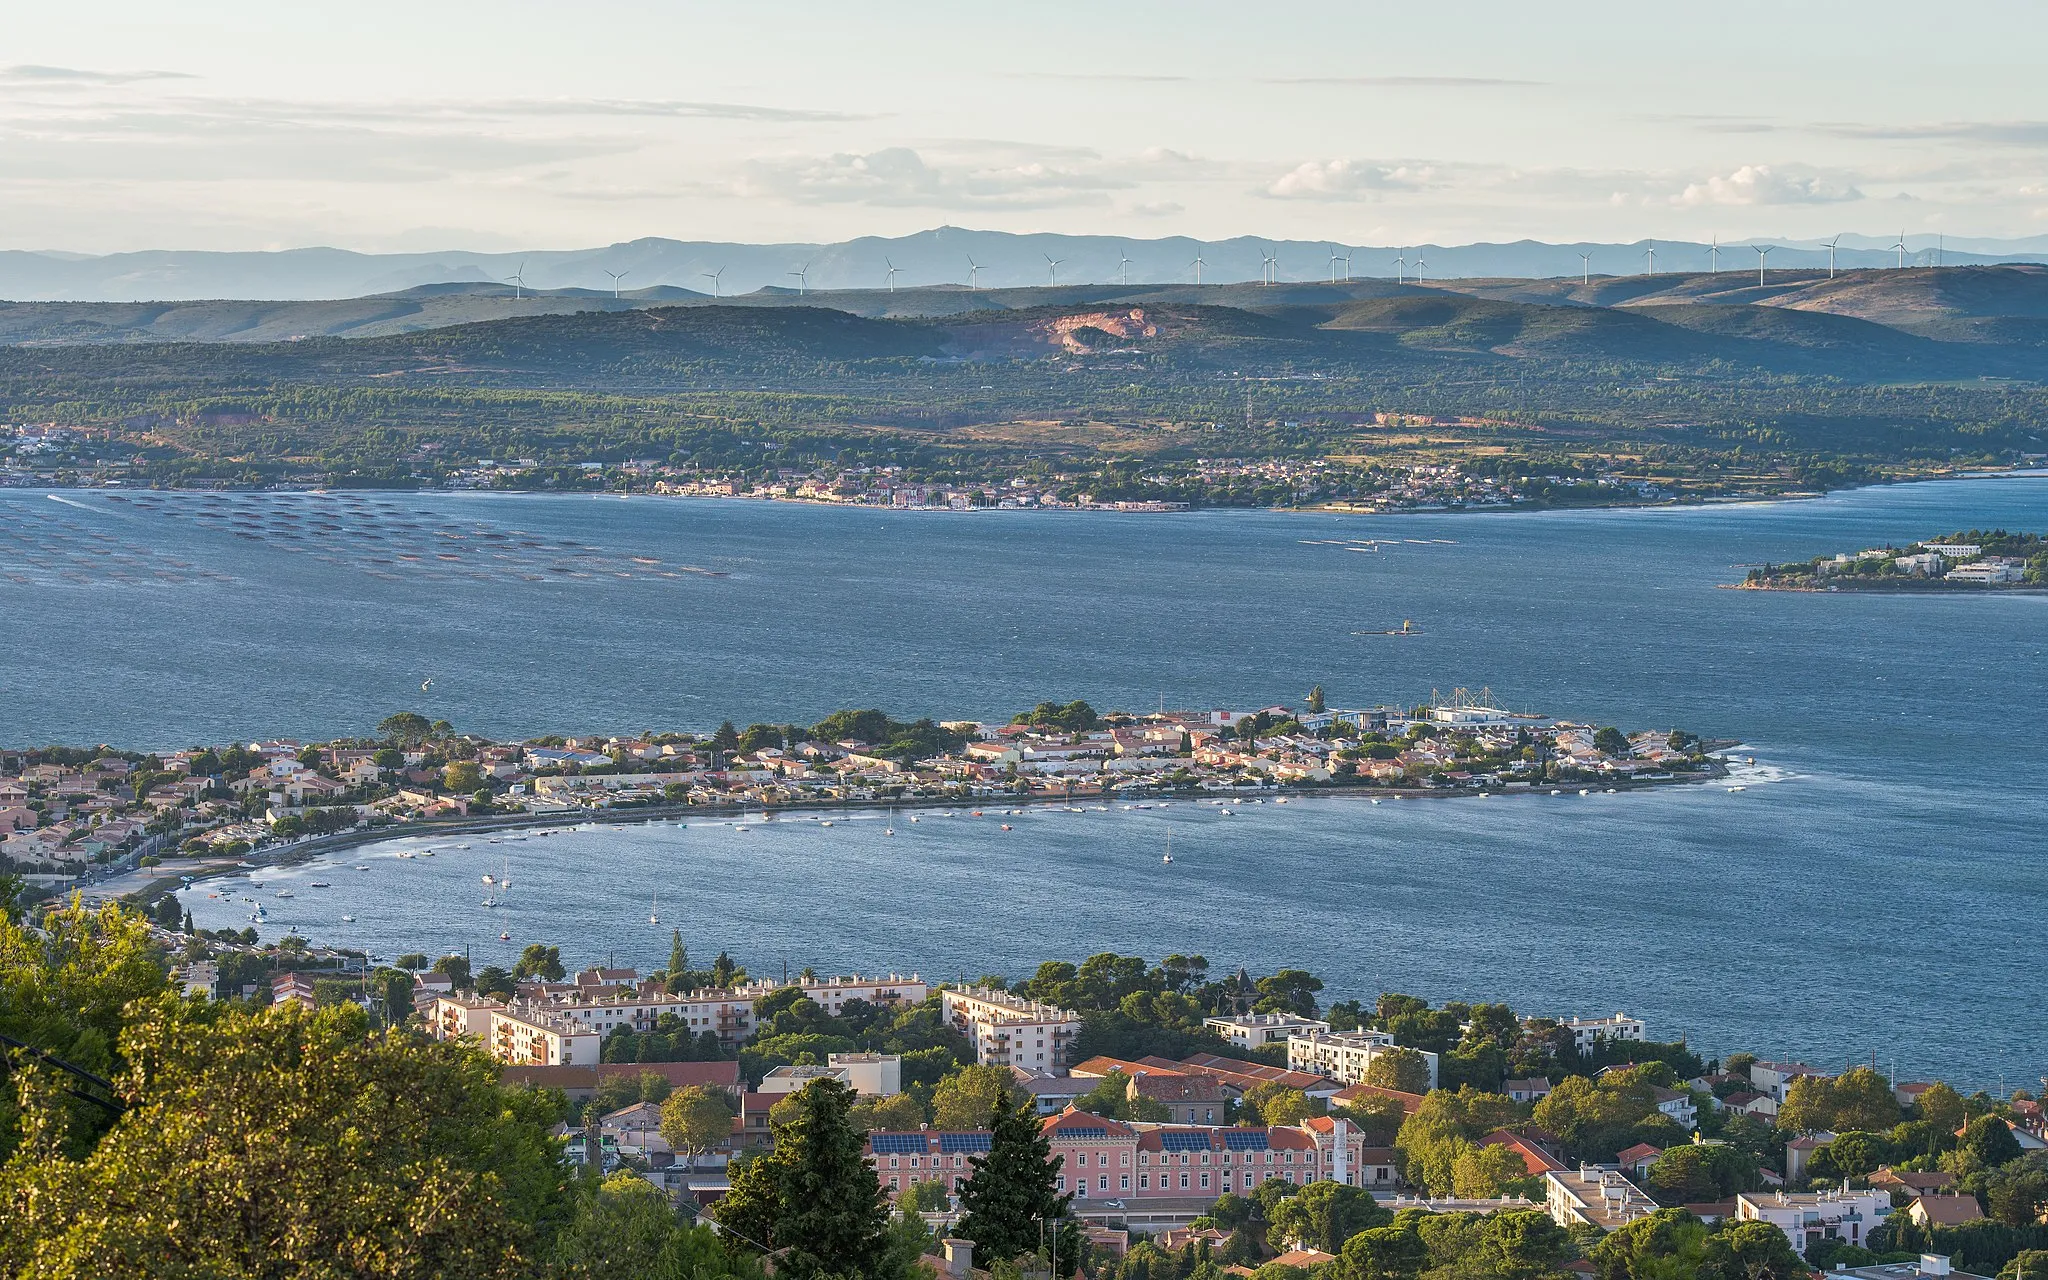 Photo showing: The Barrou Neighbourhood and the Étang de Thau. On the opposite bank the commune of Bouzigues and its Oyster farms. On the hills in the background, the Nord Bassin de Thau wind farm. Sète, Hérault, France.